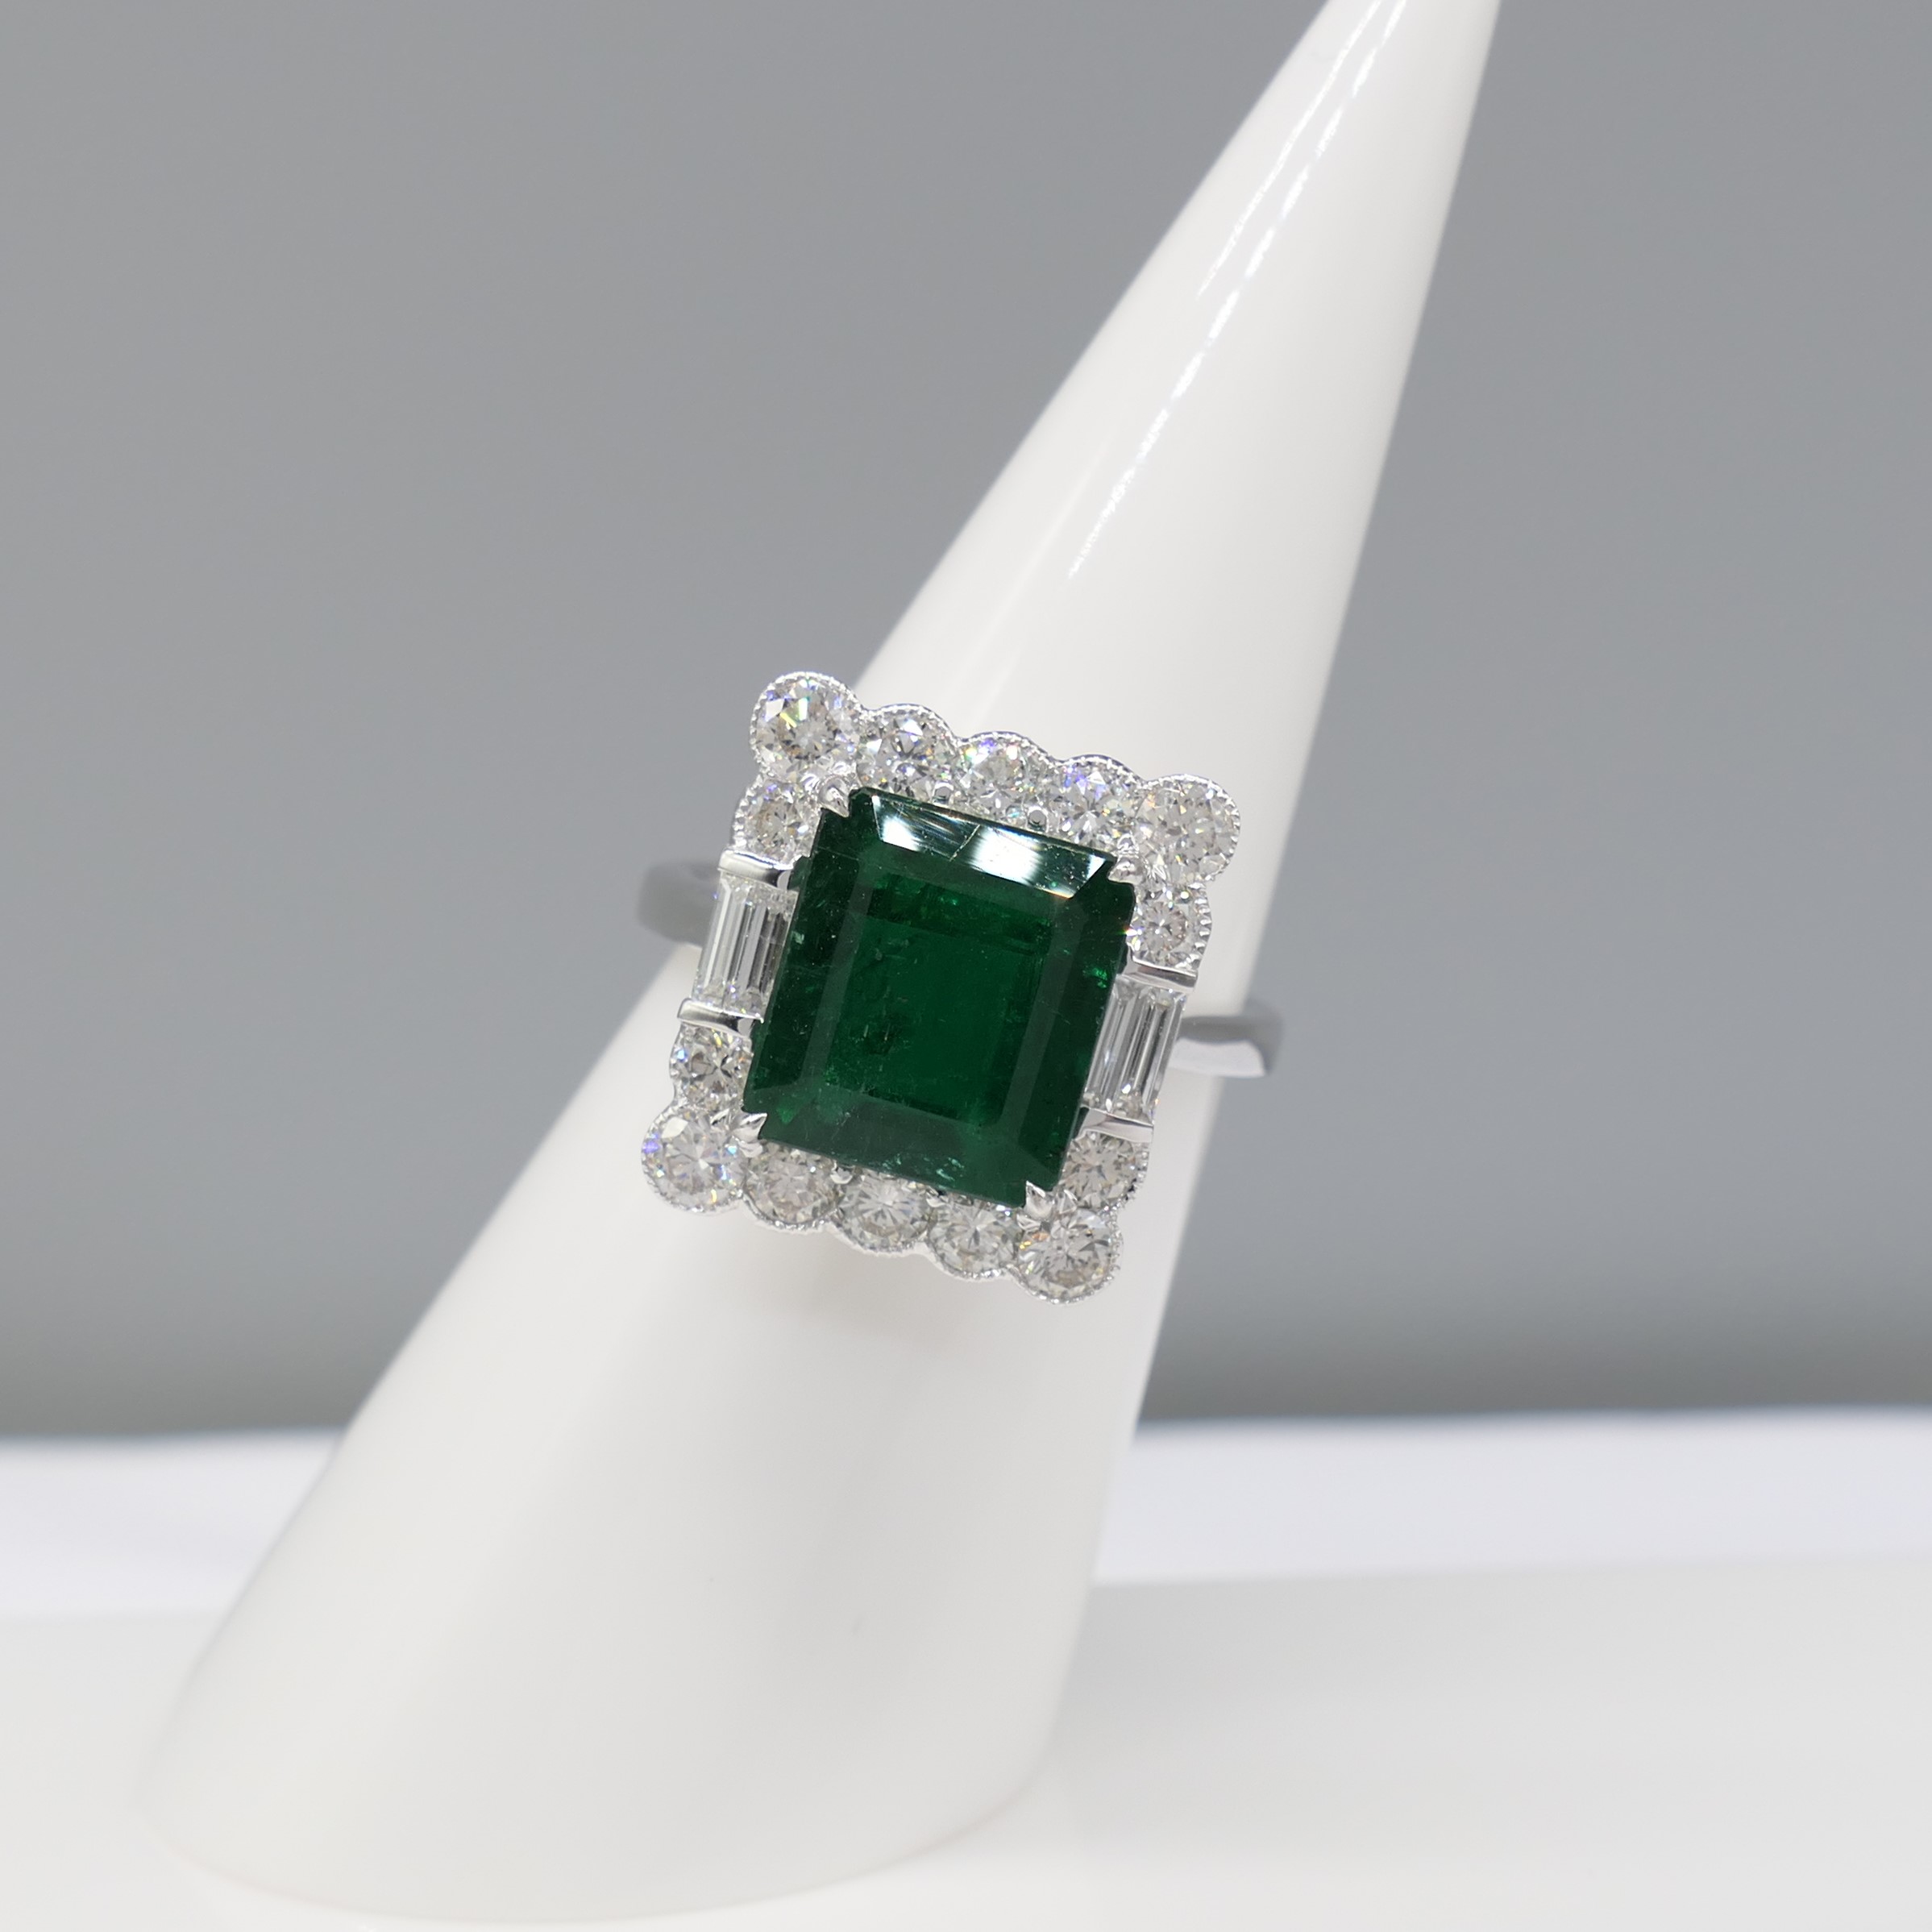 18ct White Gold Cocktail Ring Set With A Large Emerald and Diamonds - Image 4 of 7